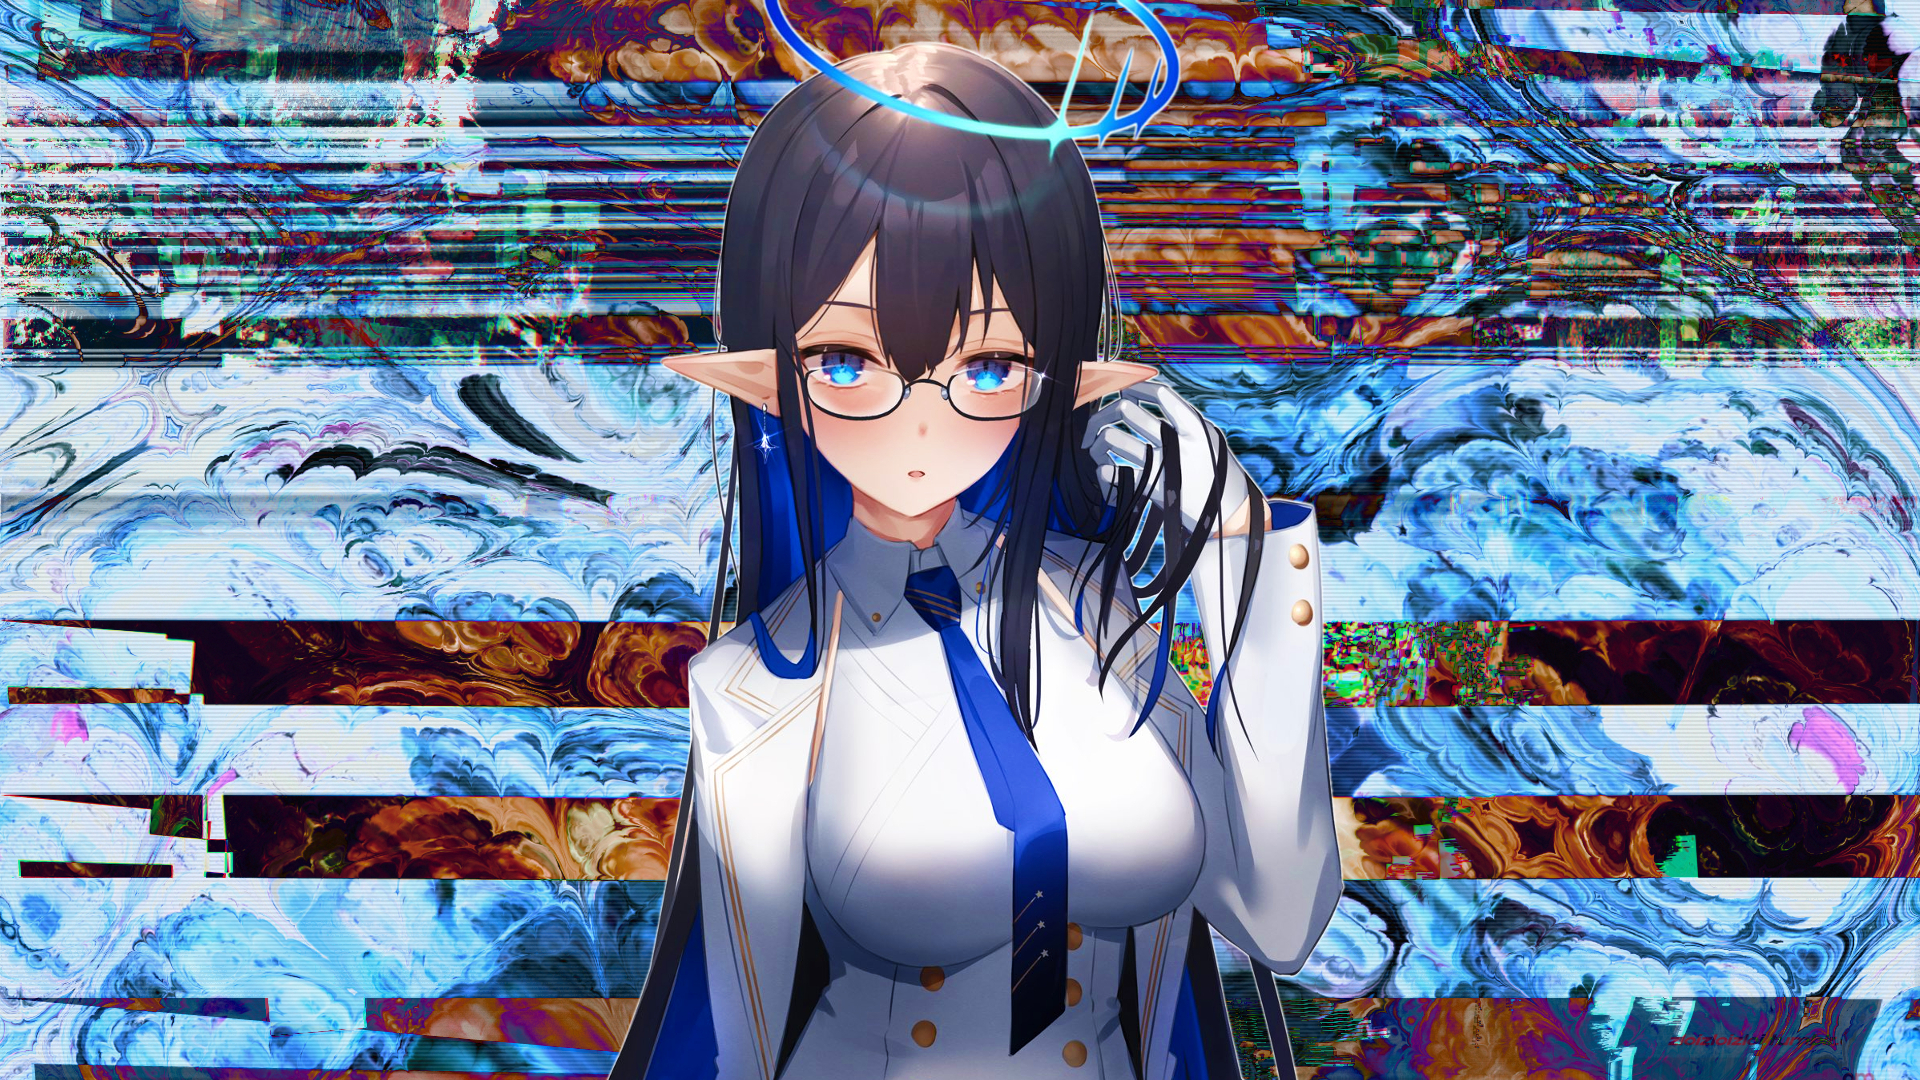 Anime 1920x1080 anime girls creative coding big boobs halo hands in hair pointy ears anime tie glasses blue eyes gloves